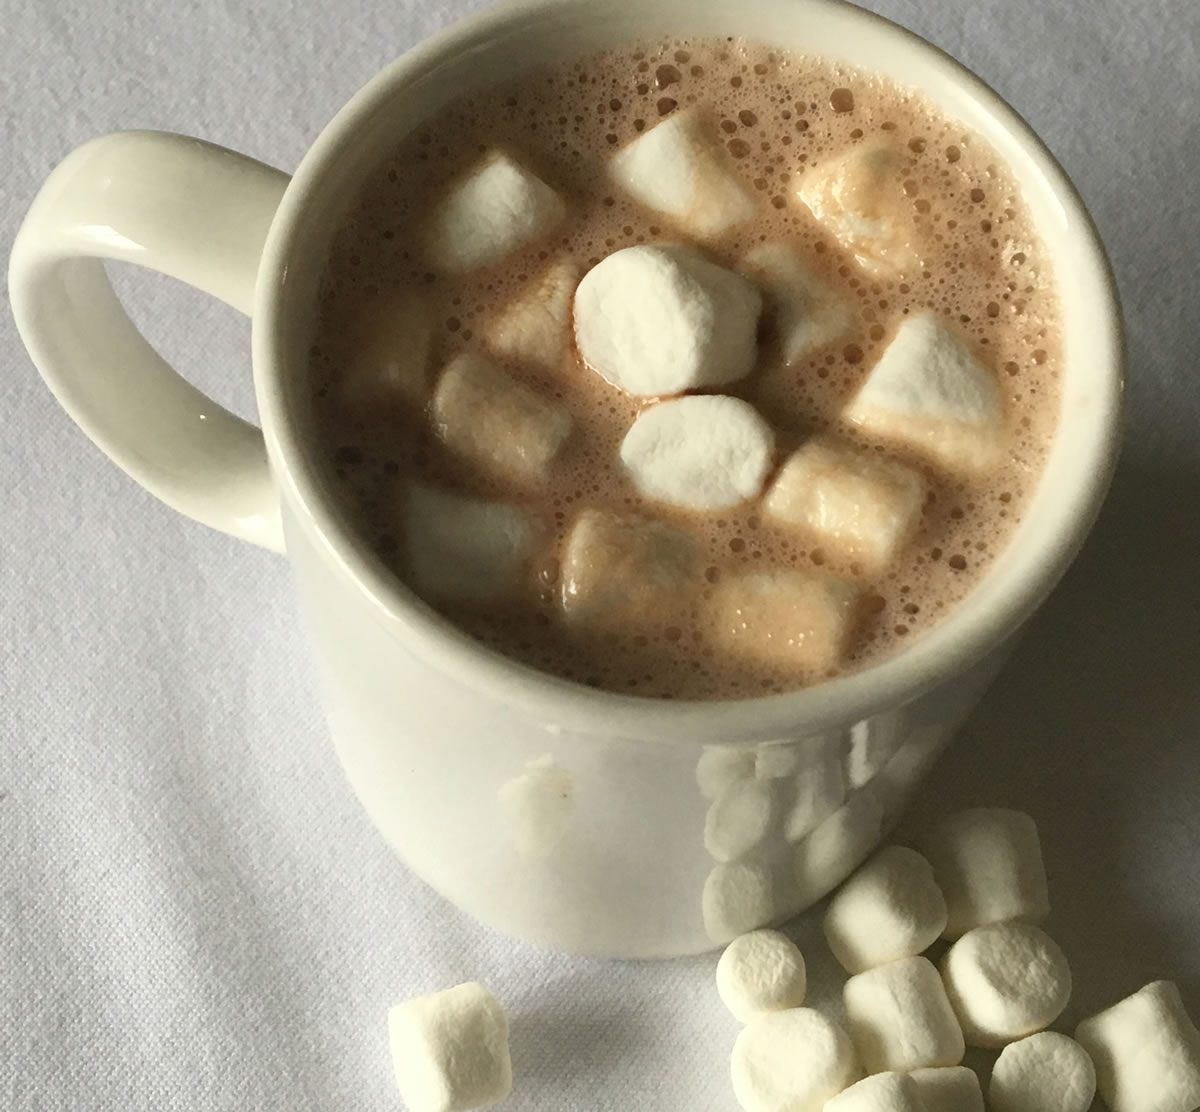 Homemade hot chocolate with marshmallows is easy to make.